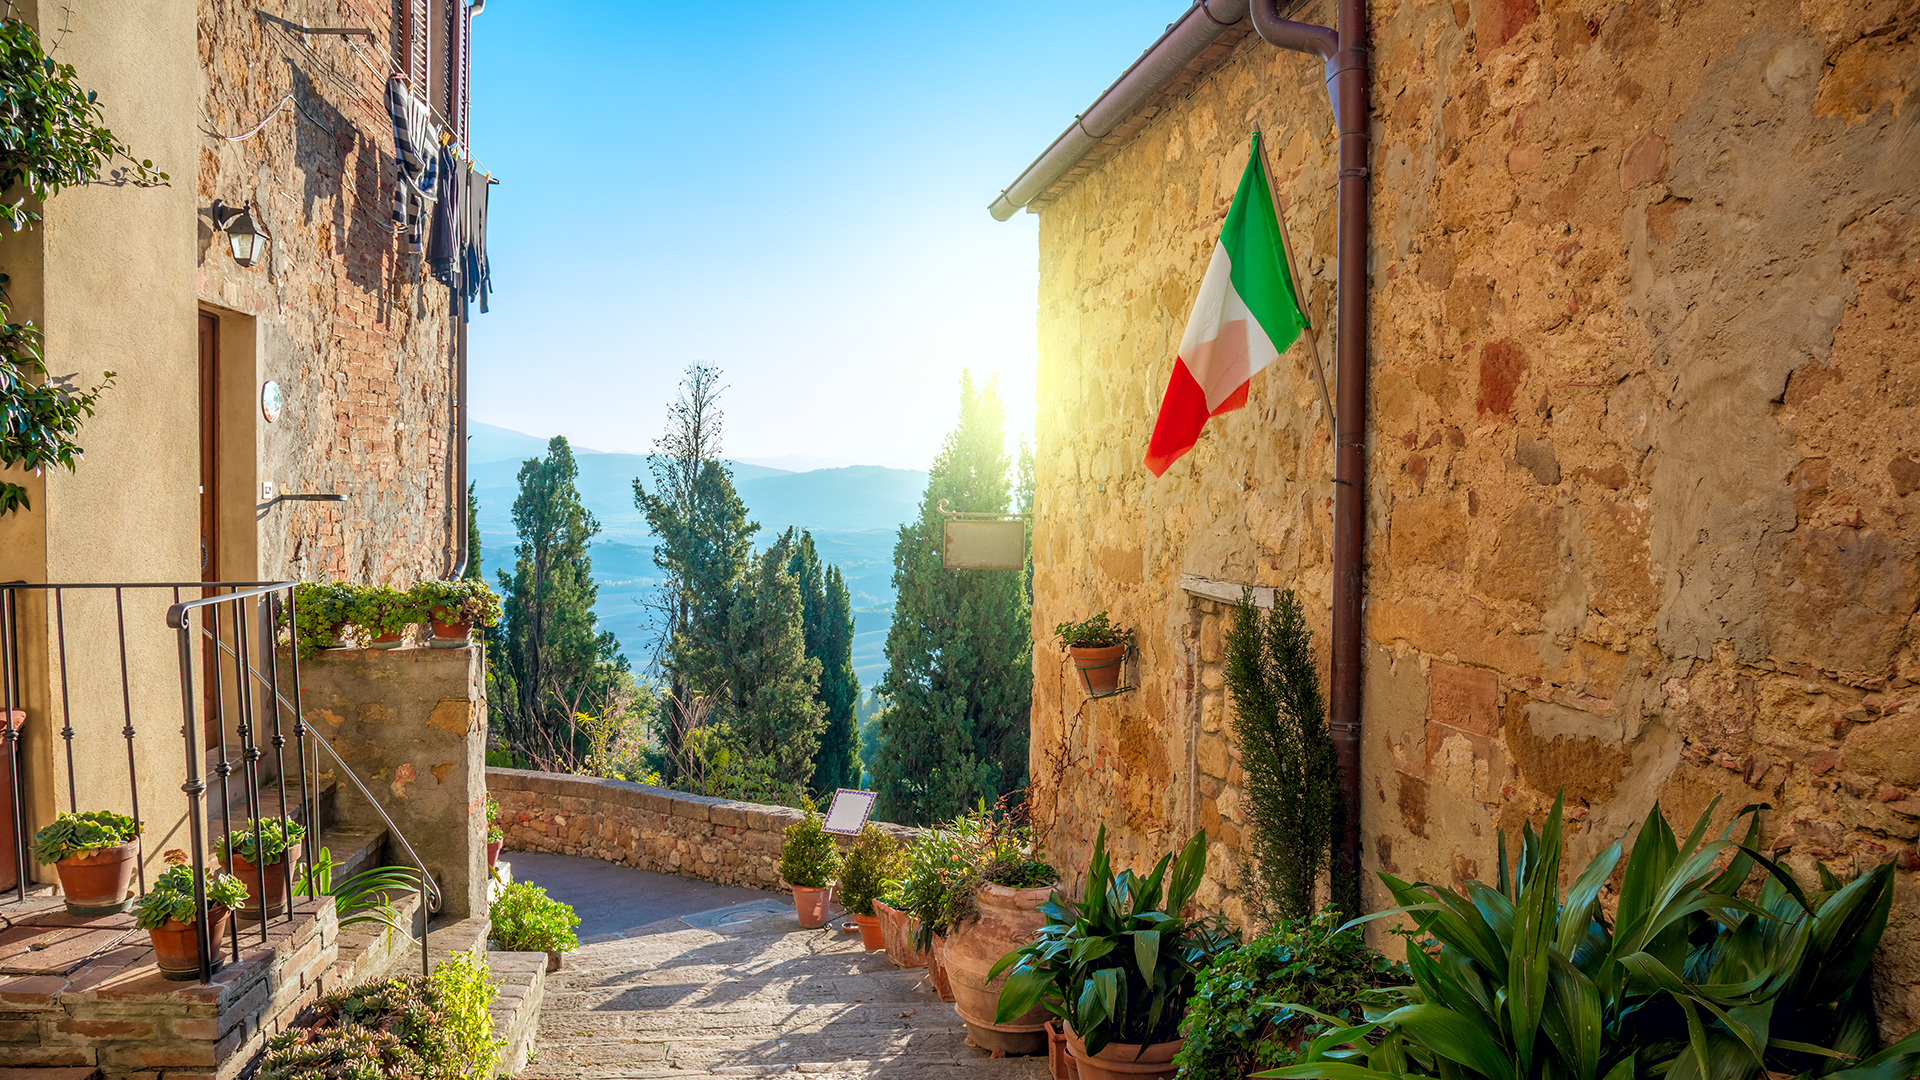 Remember the important changes in Italy’s transfer pricing documentation requirements!